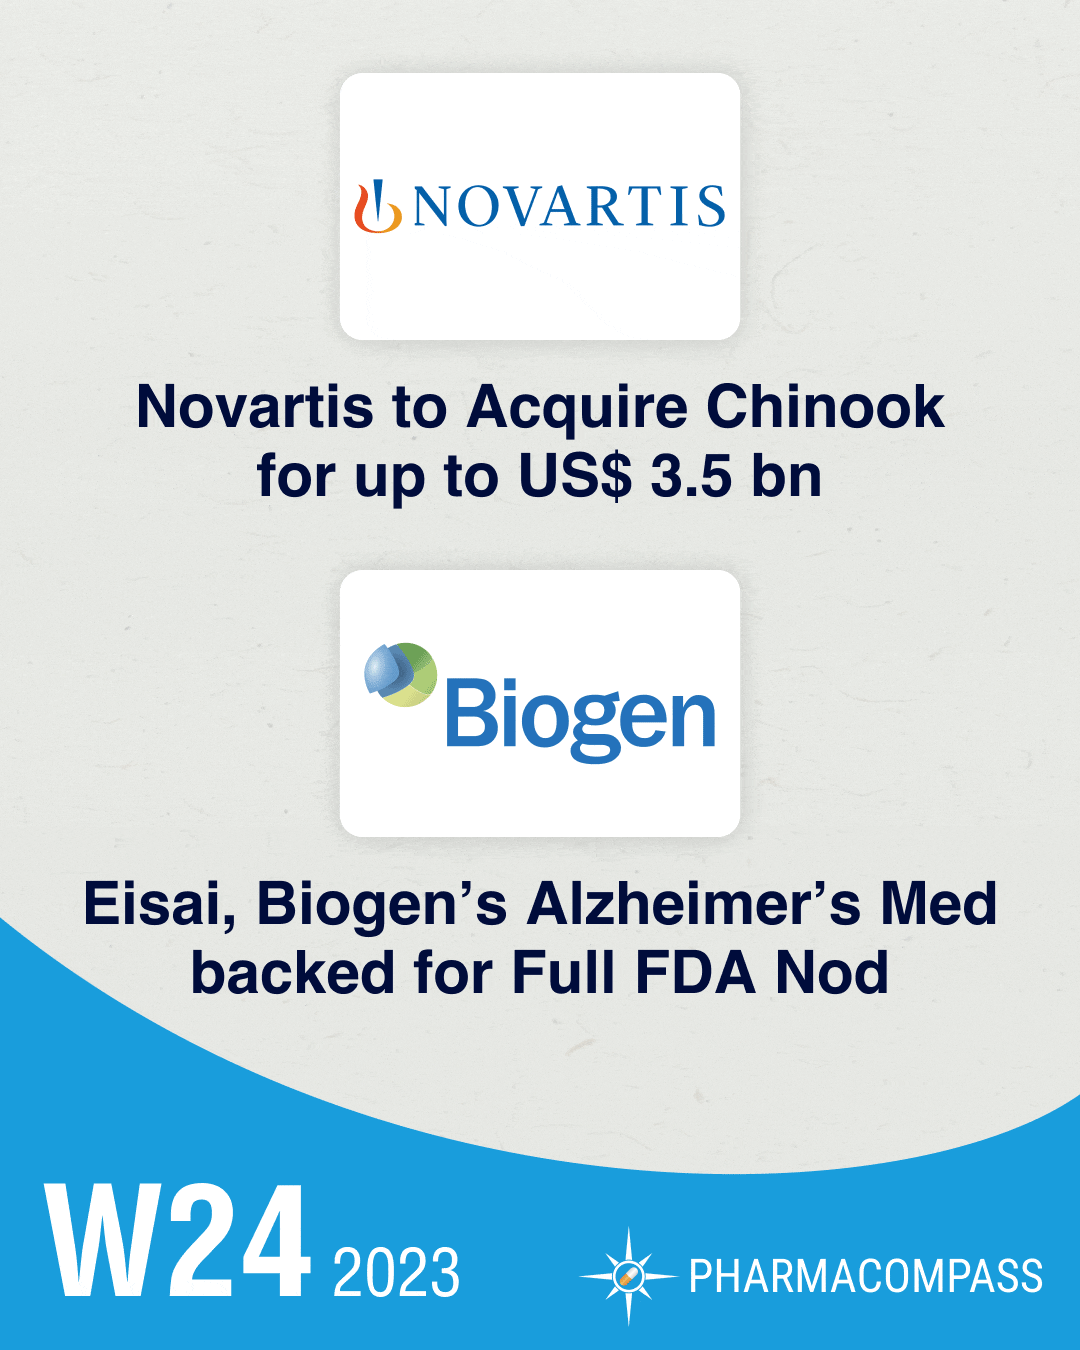 Trade body sues US govt over IRA; Novartis buys Chinook for up to US$ 3.5 billion